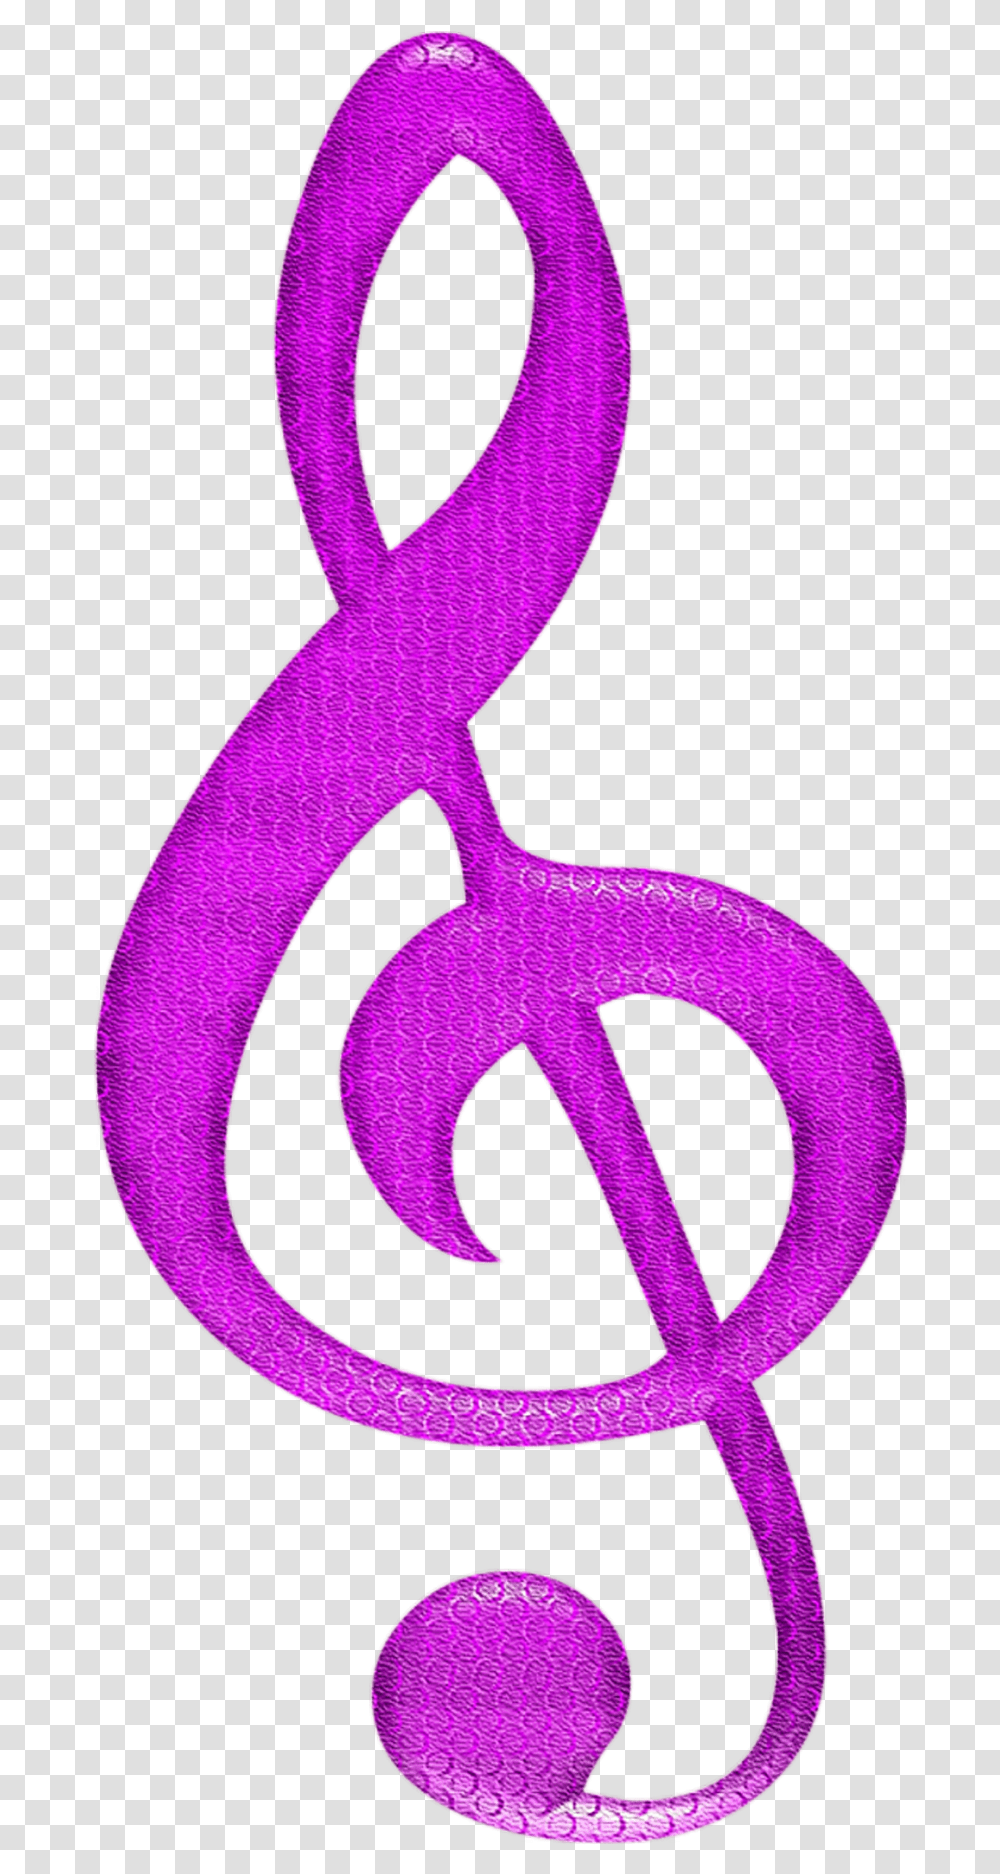 Treble Clef 001 Free Stock Photo Silhouette Music Notes Svg, Snake, Reptile, Animal, Symbol Transparent Png